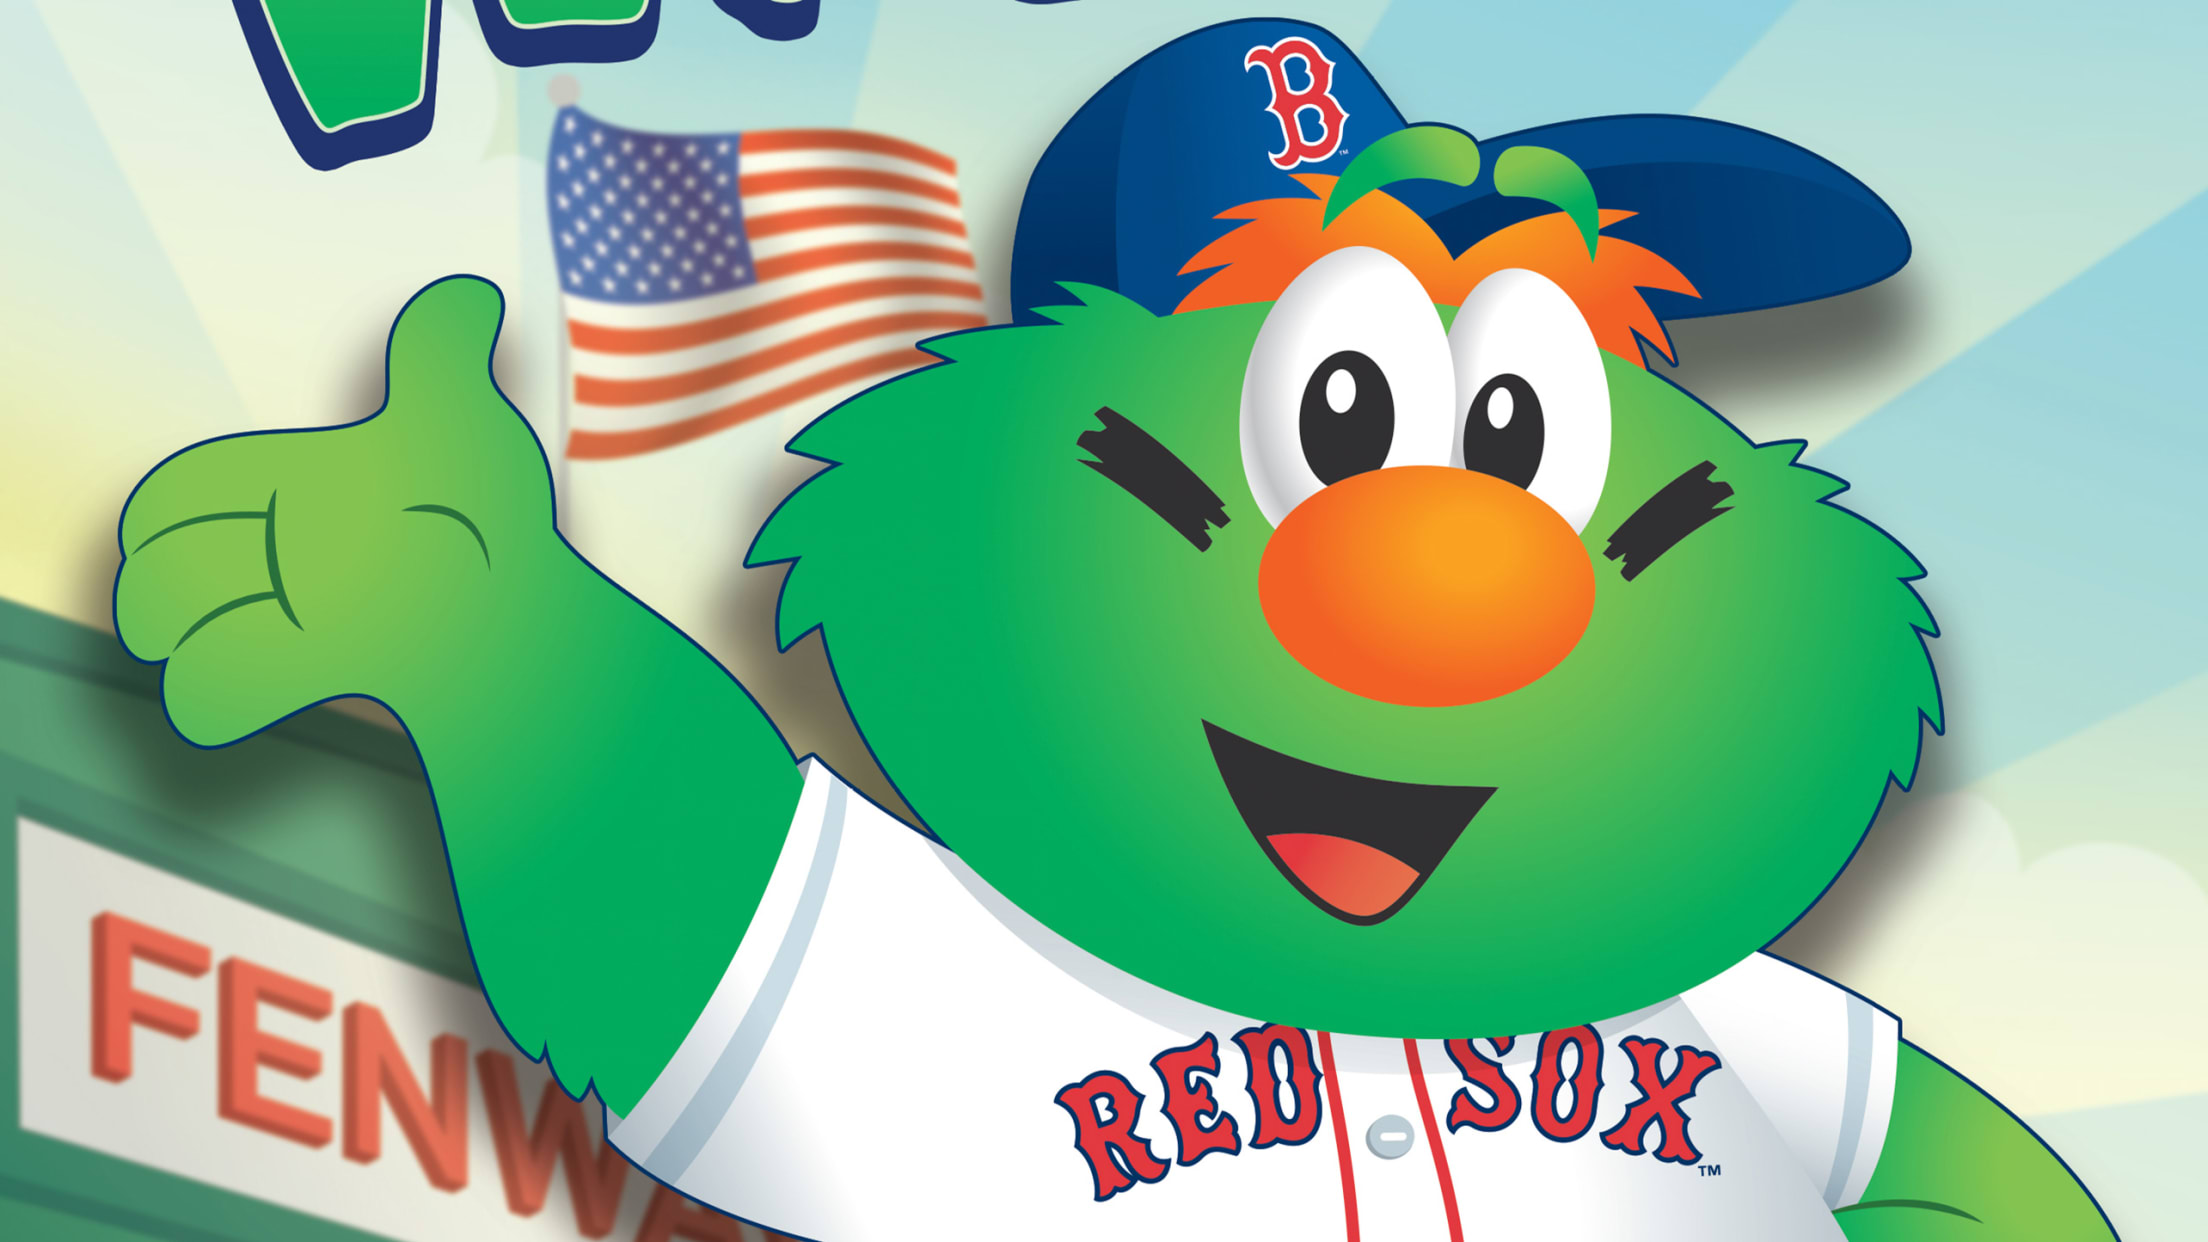 Red Sox mascots Wally and Tessie to skate with fans on Boston Common's Frog  Pond 